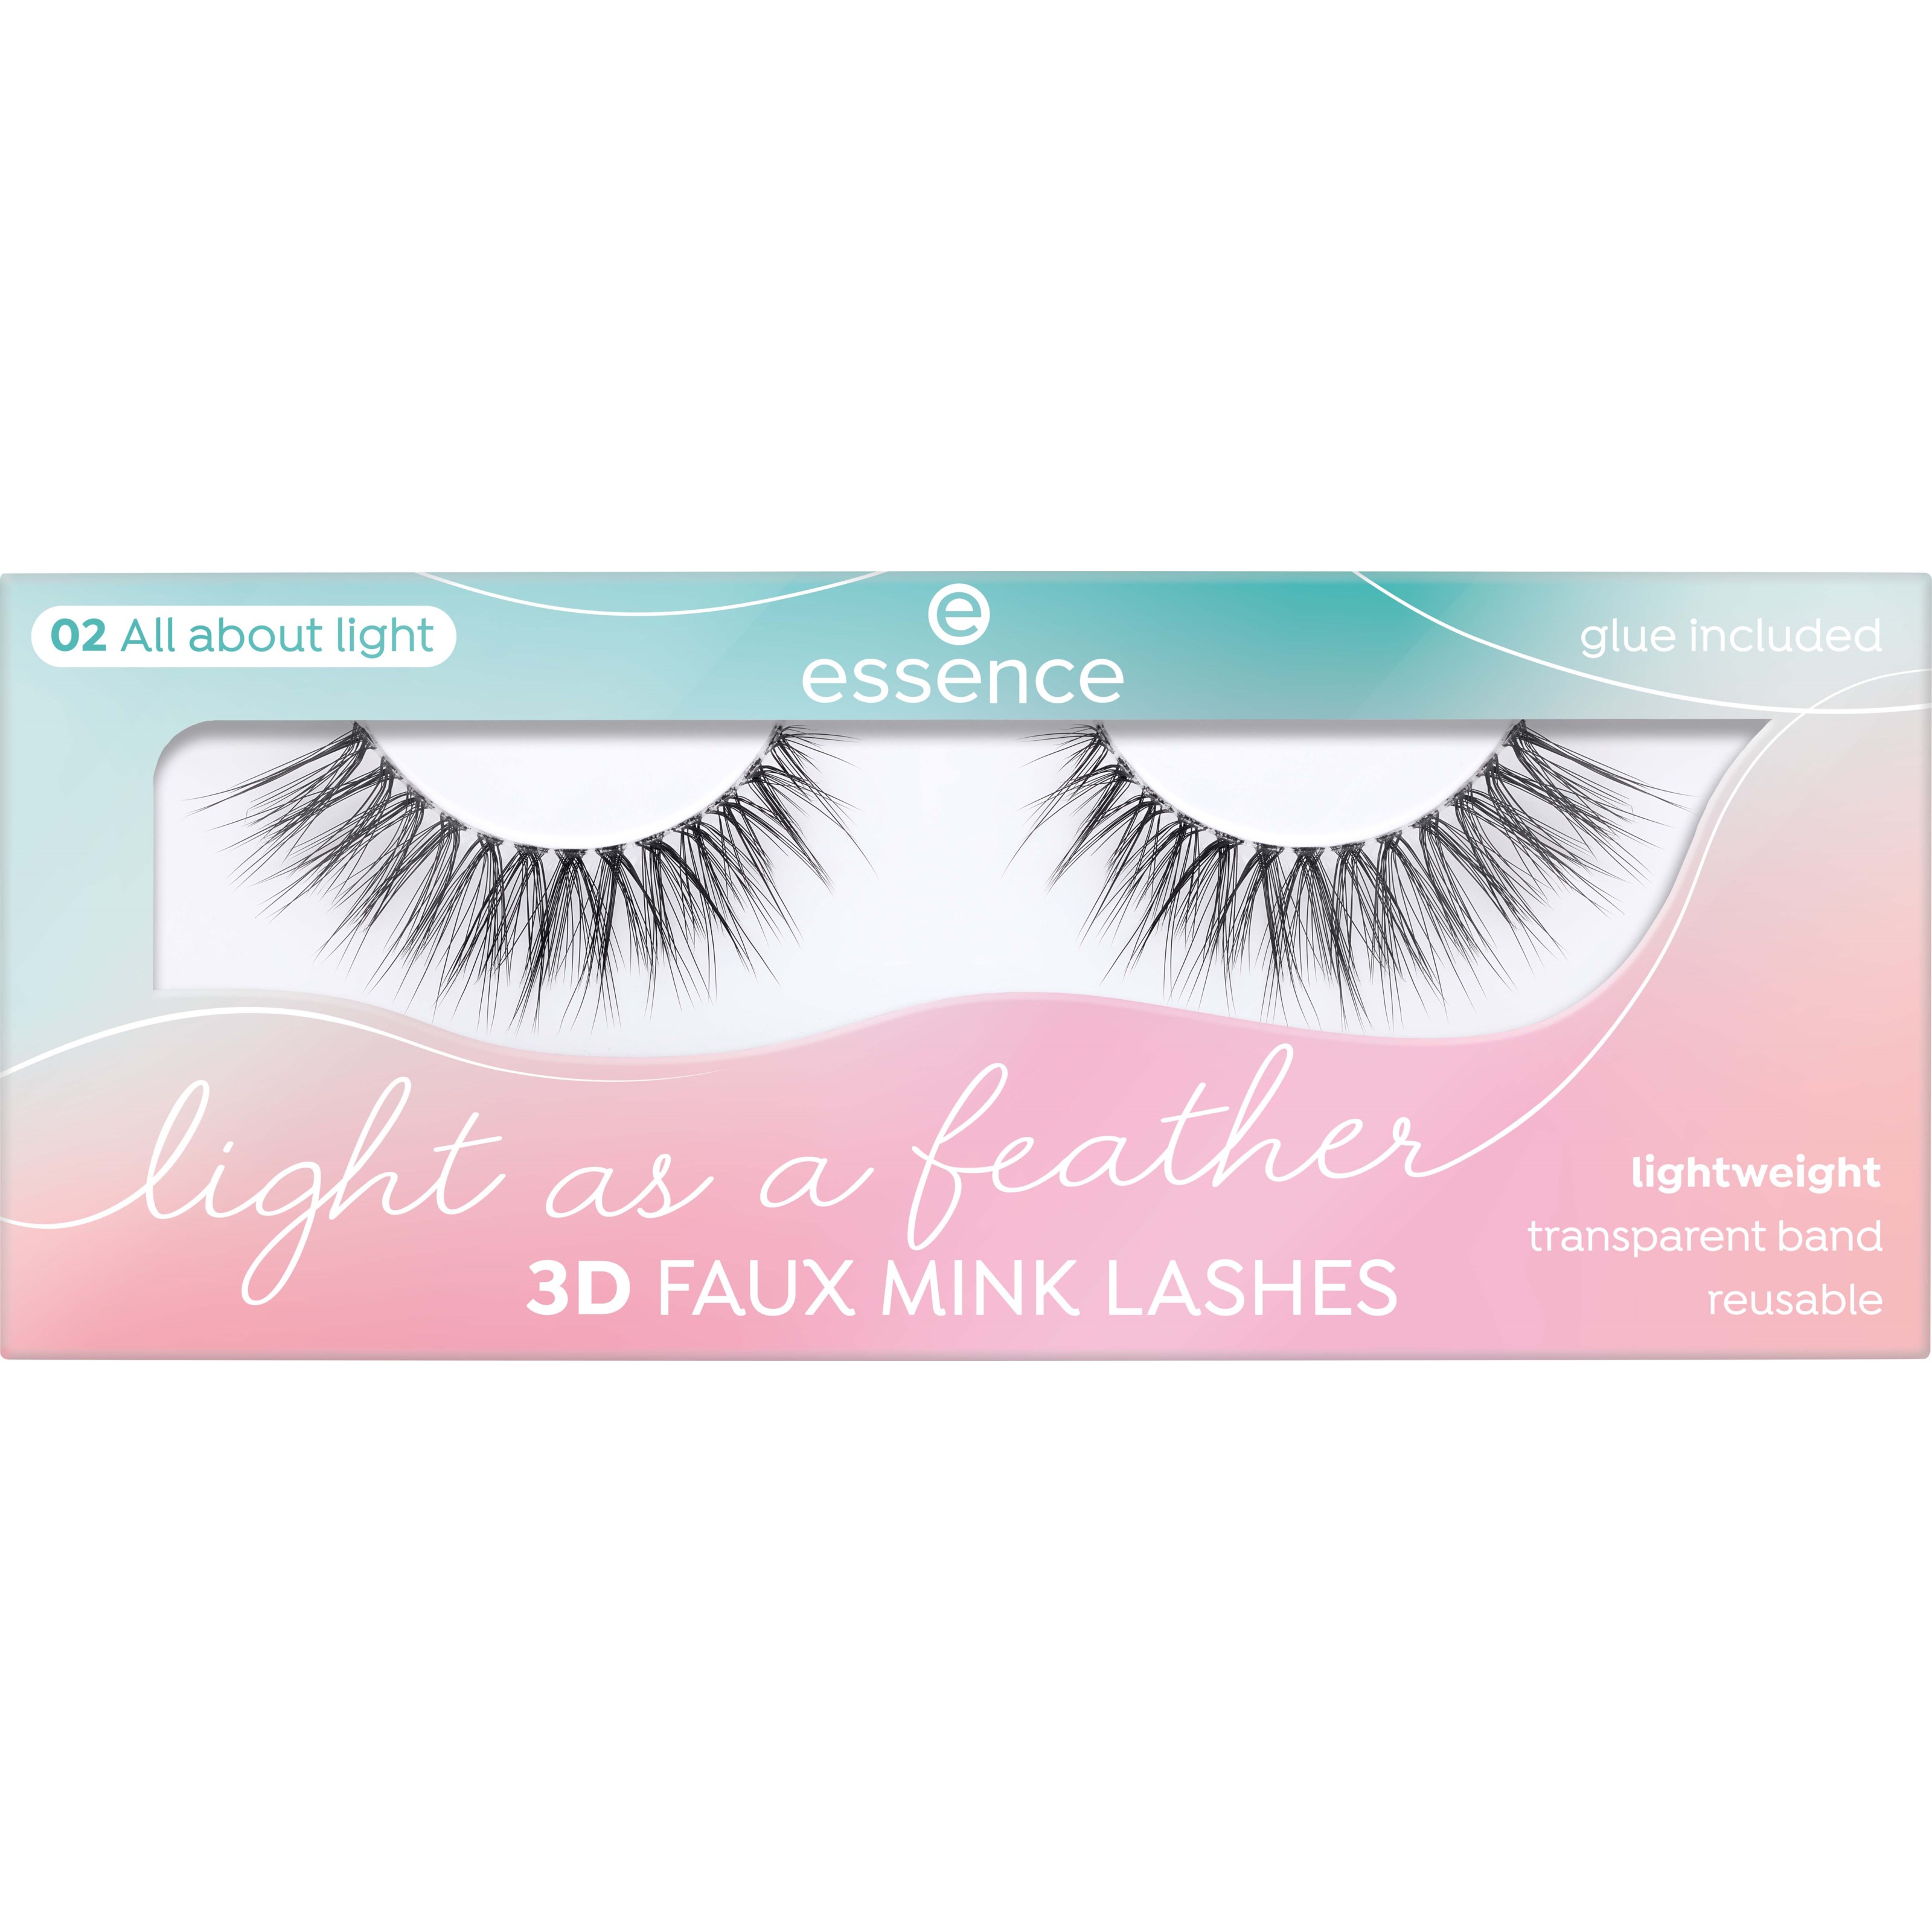 Läs mer om essence Light As A Feather 3D Faux Mink Lashes 02 All about light